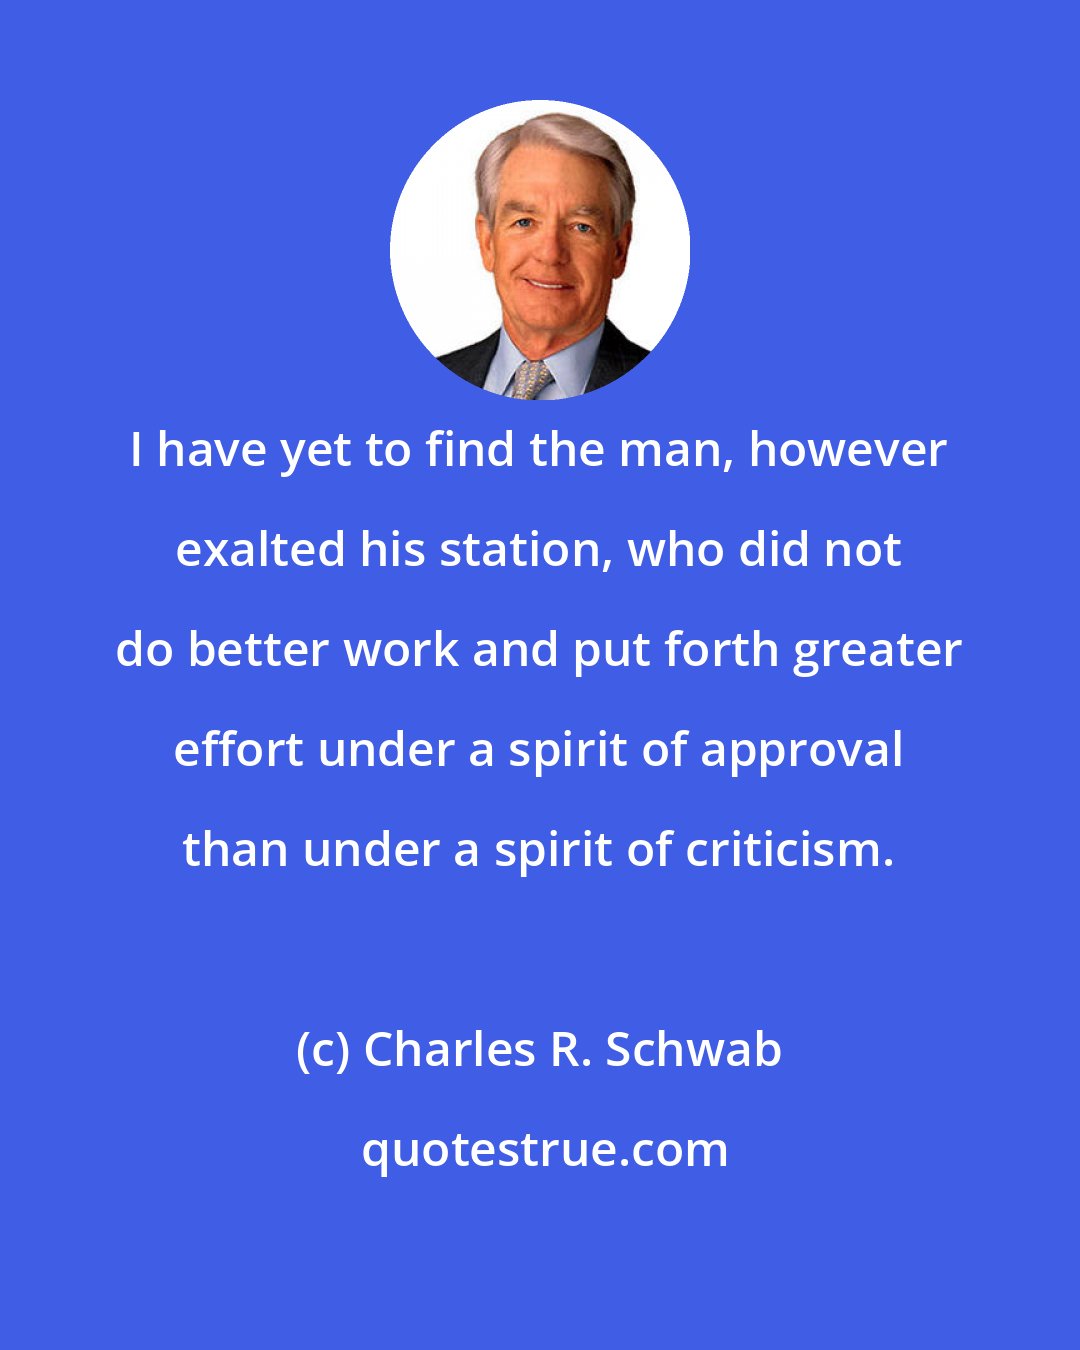 Charles R. Schwab: I have yet to find the man, however exalted his station, who did not do better work and put forth greater effort under a spirit of approval than under a spirit of criticism.